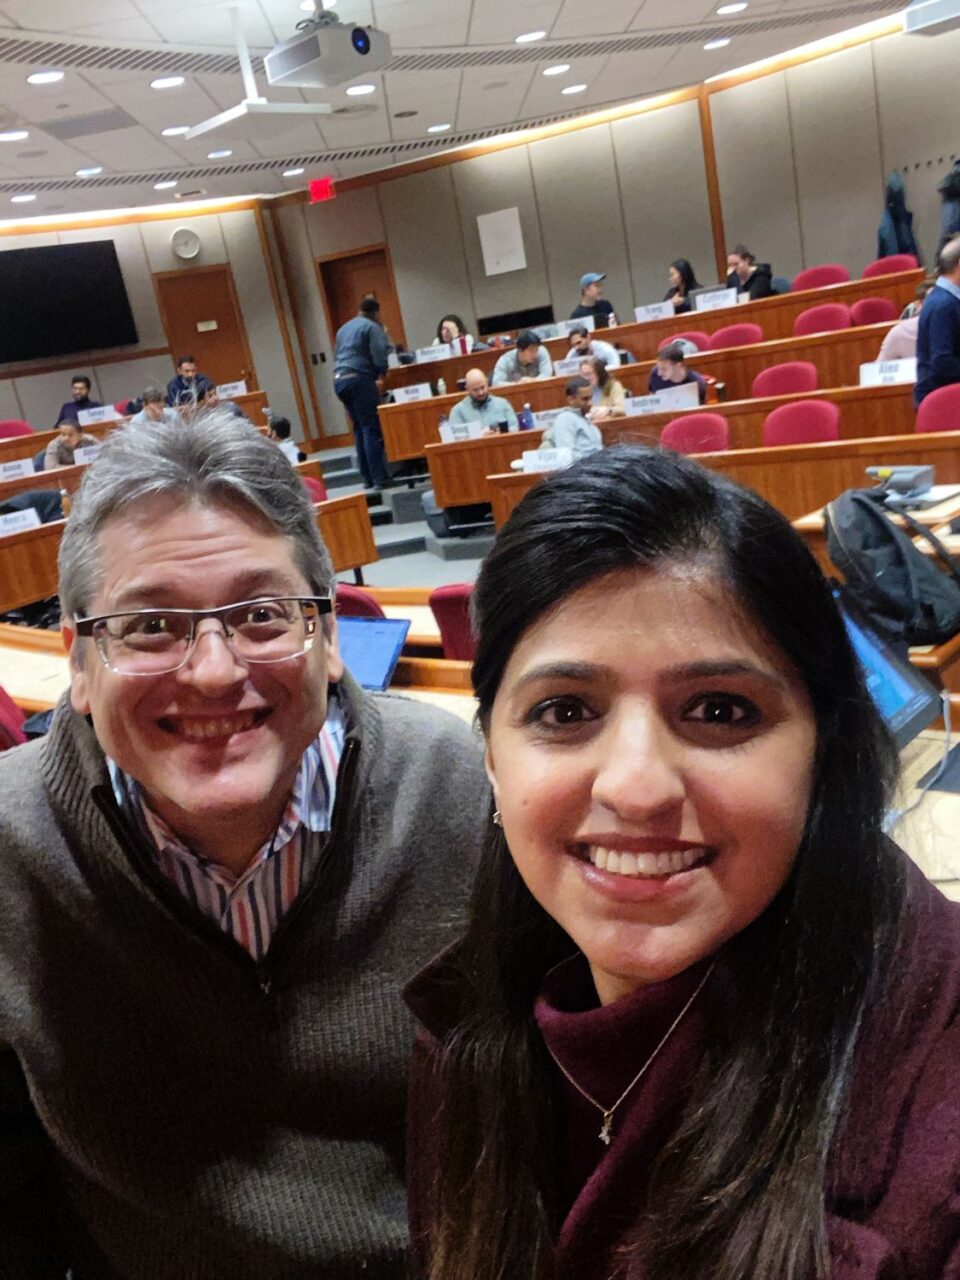 Fiza Shaukat: It was great speaking to the 2nd year Harvard Business School MS/MBA class